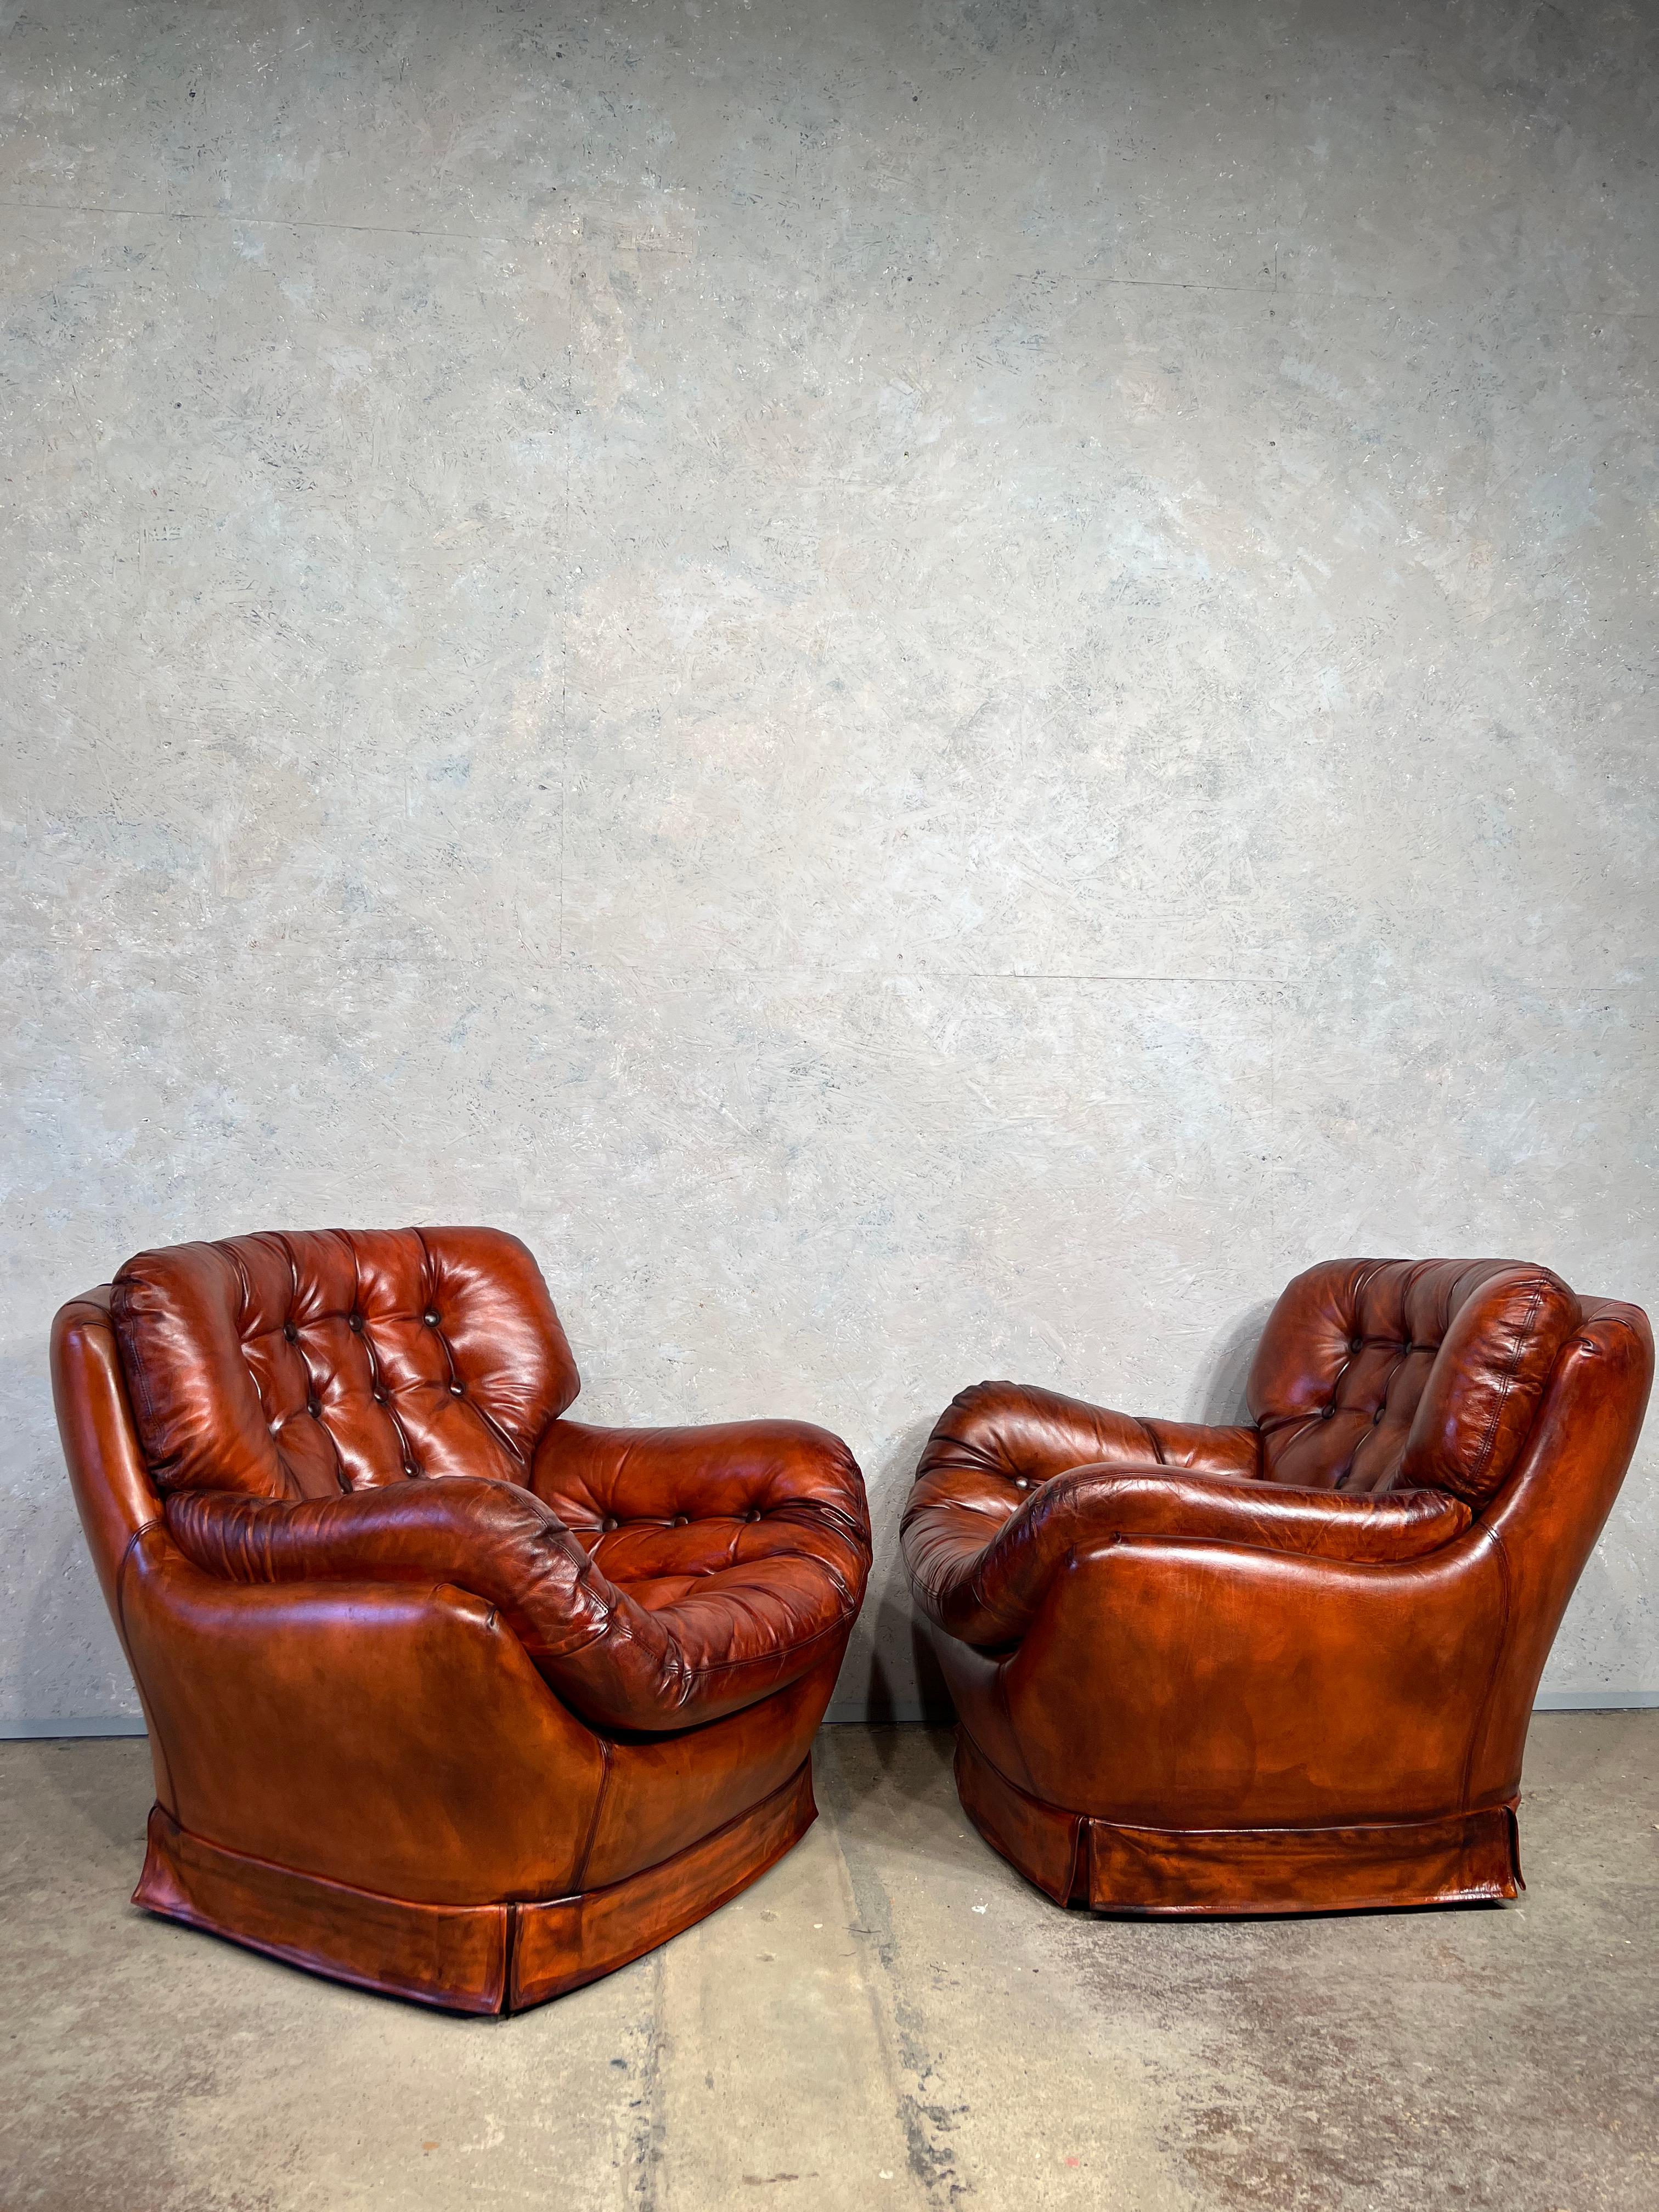 Pair of Leather Egg Chairs Swedish 70 S Cognac Leather Vintage Mid C Retro #438 For Sale 1